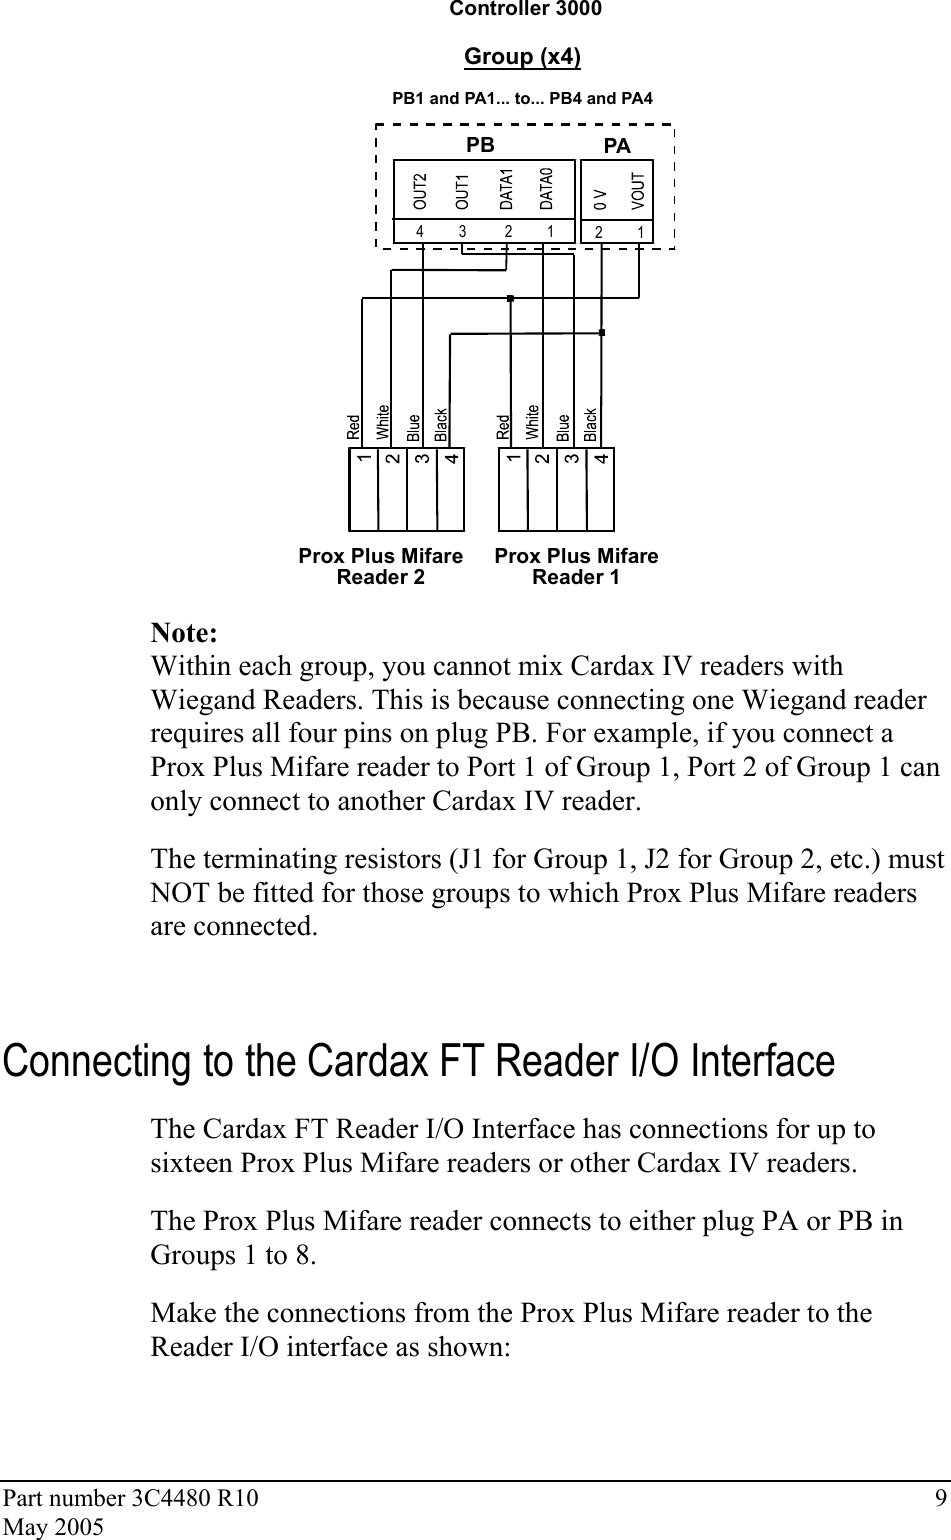 Part number 3C4480 R10  9 May 2005 Controller 3000PAGroup (x4)PB1 and PA1... to... PB4 and PA44         3          2         1 2         1PBProx Plus MifareReader 1Prox Plus MifareReader 2  Note: Within each group, you cannot mix Cardax IV readers with Wiegand Readers. This is because connecting one Wiegand reader requires all four pins on plug PB. For example, if you connect a Prox Plus Mifare reader to Port 1 of Group 1, Port 2 of Group 1 can only connect to another Cardax IV reader. The terminating resistors (J1 for Group 1, J2 for Group 2, etc.) must NOT be fitted for those groups to which Prox Plus Mifare readers are connected. Connecting to the Cardax FT Reader I/O Interface The Cardax FT Reader I/O Interface has connections for up to sixteen Prox Plus Mifare readers or other Cardax IV readers. The Prox Plus Mifare reader connects to either plug PA or PB in Groups 1 to 8. Make the connections from the Prox Plus Mifare reader to the Reader I/O interface as shown: 